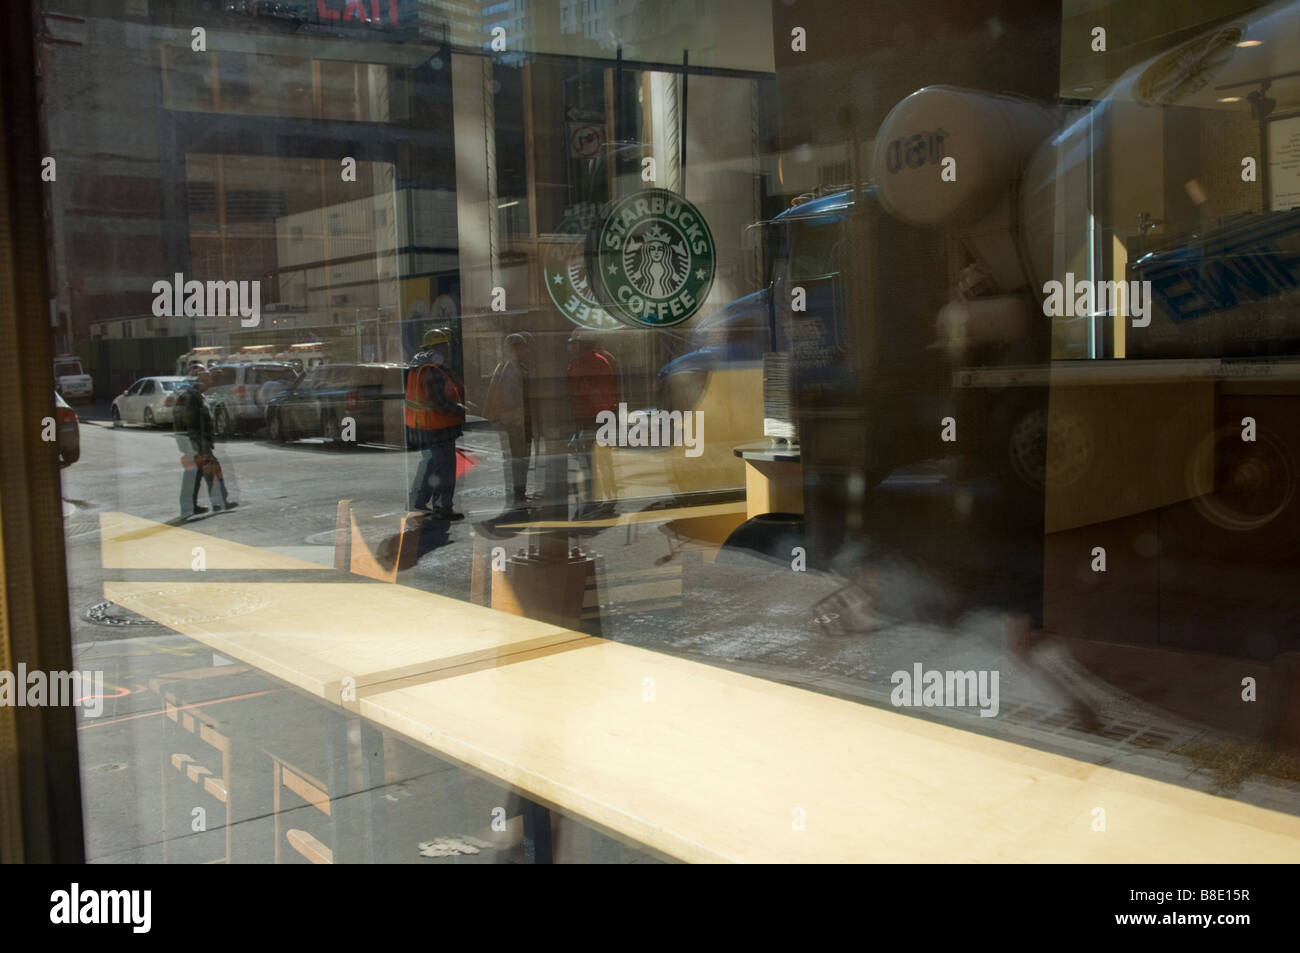 A Starbucks coffee shop seen in Lower Manhattan on Thursday February 19 12009 Frances M Roberts Stock Photo